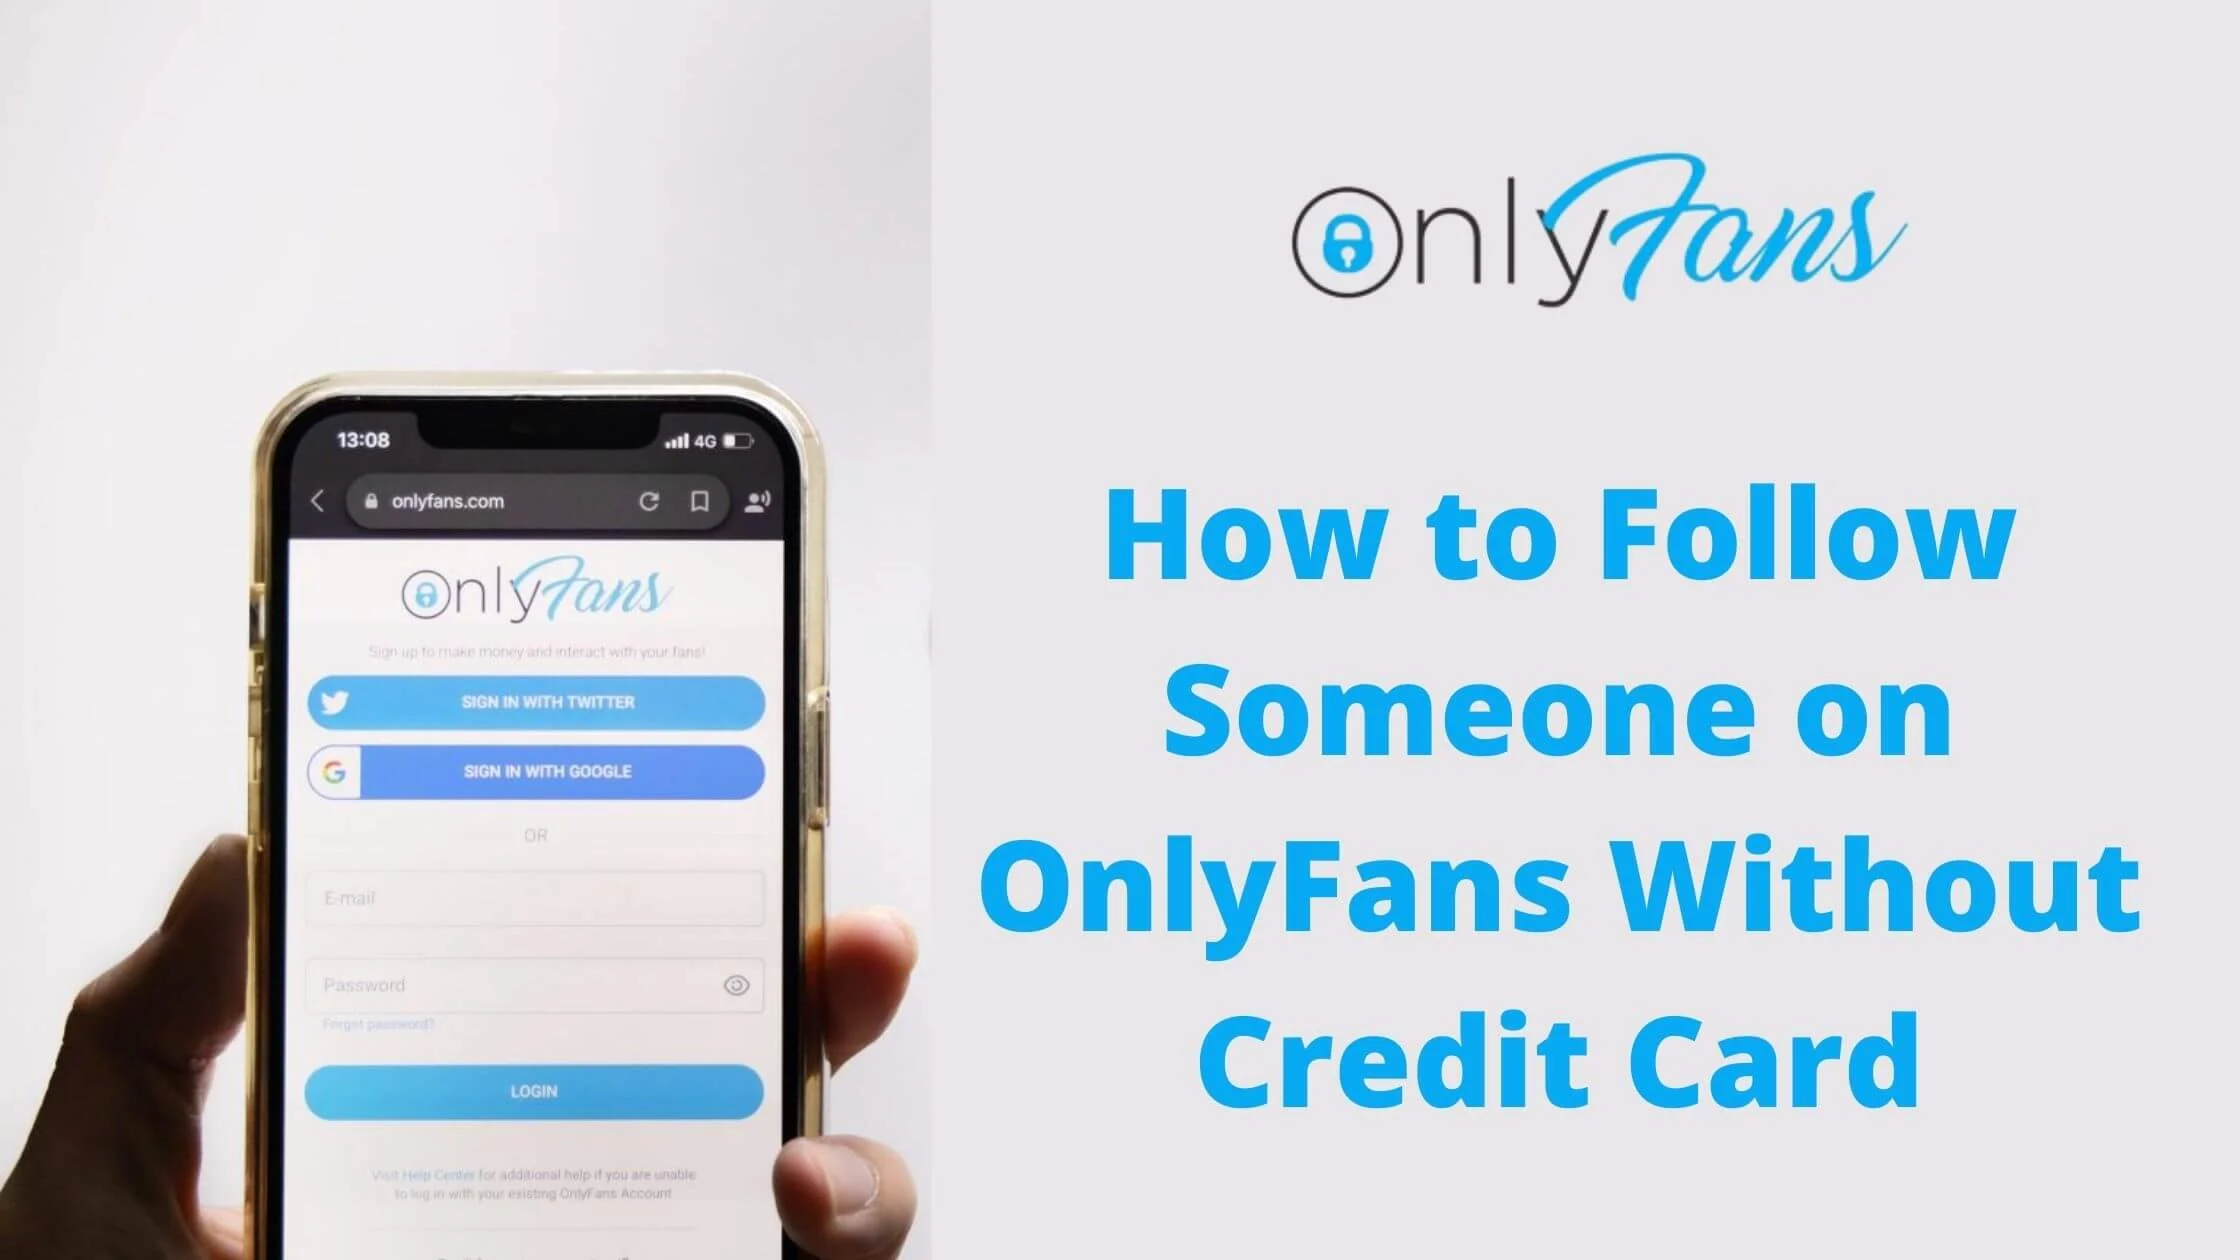 Can you subscribe to onlyfans with a visa gift card